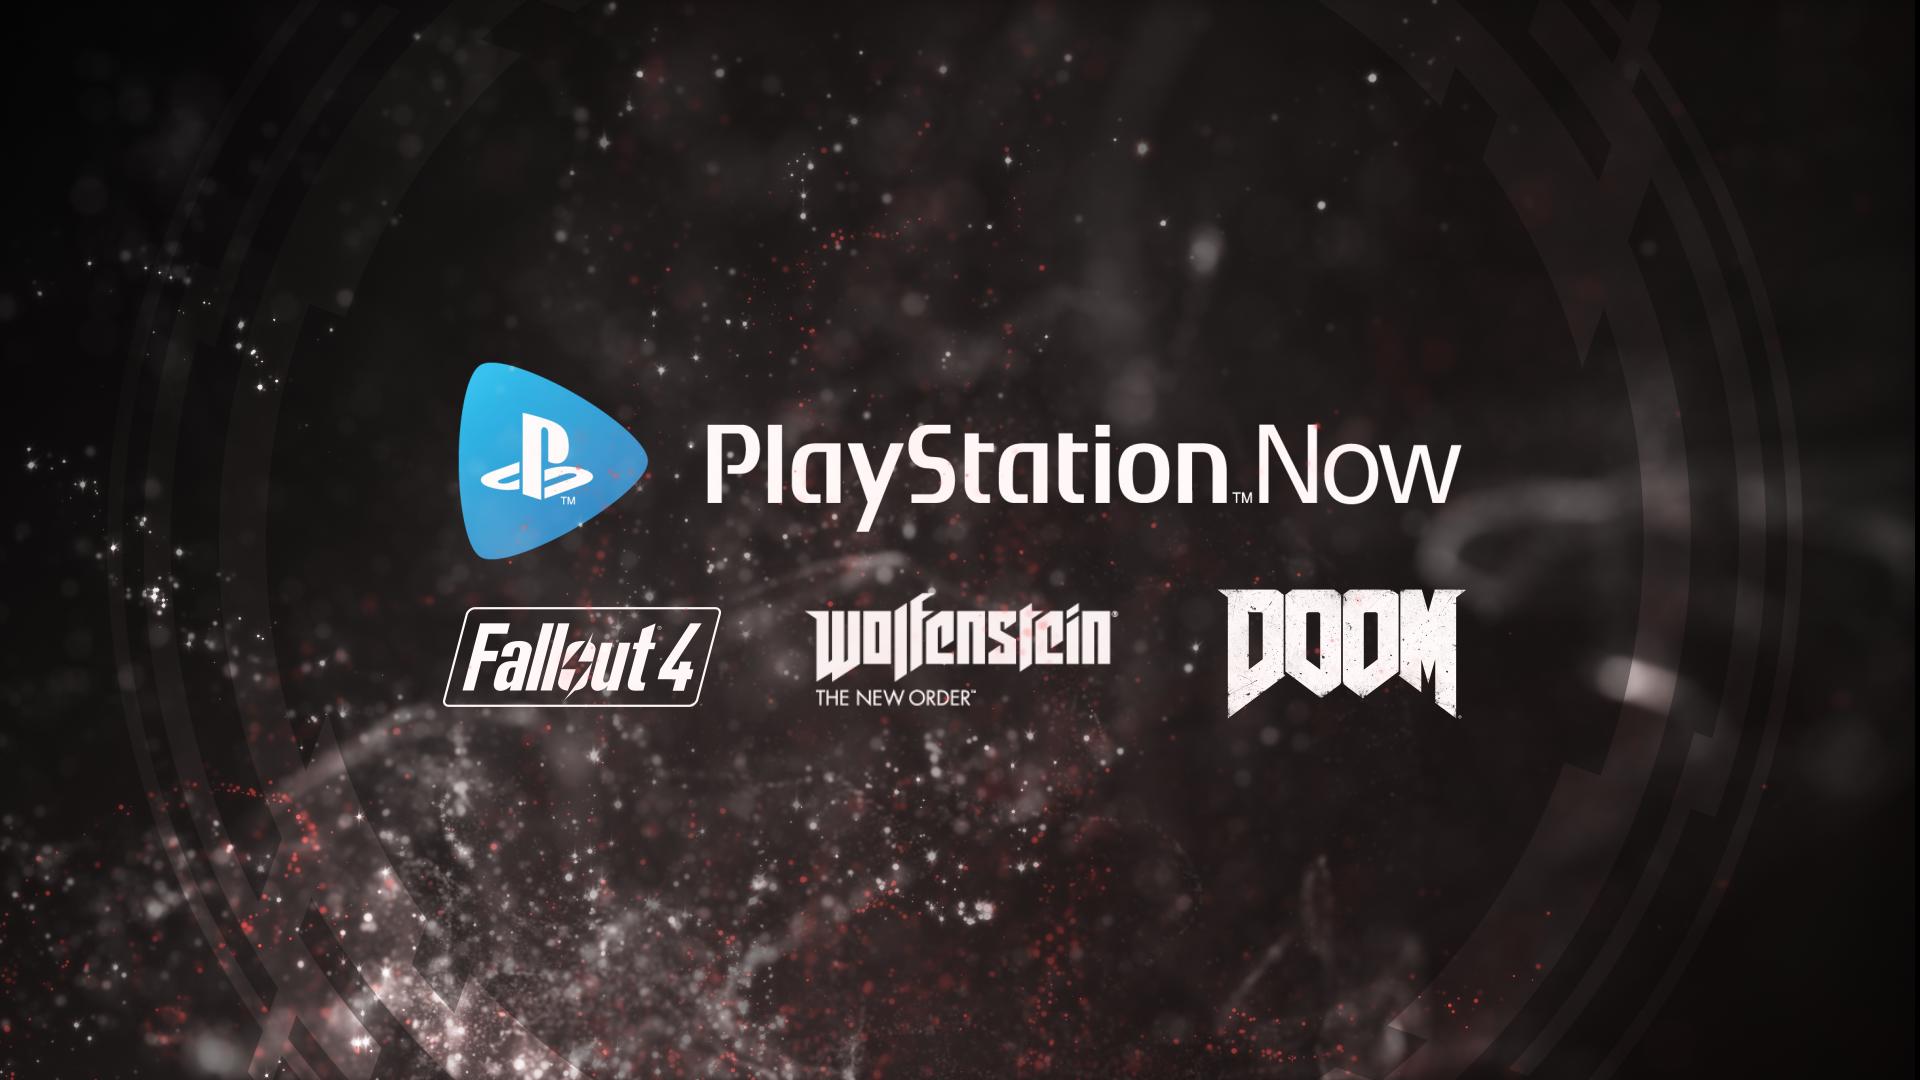 Ps now fallout 4 wolfenstein doom quakecon 2019